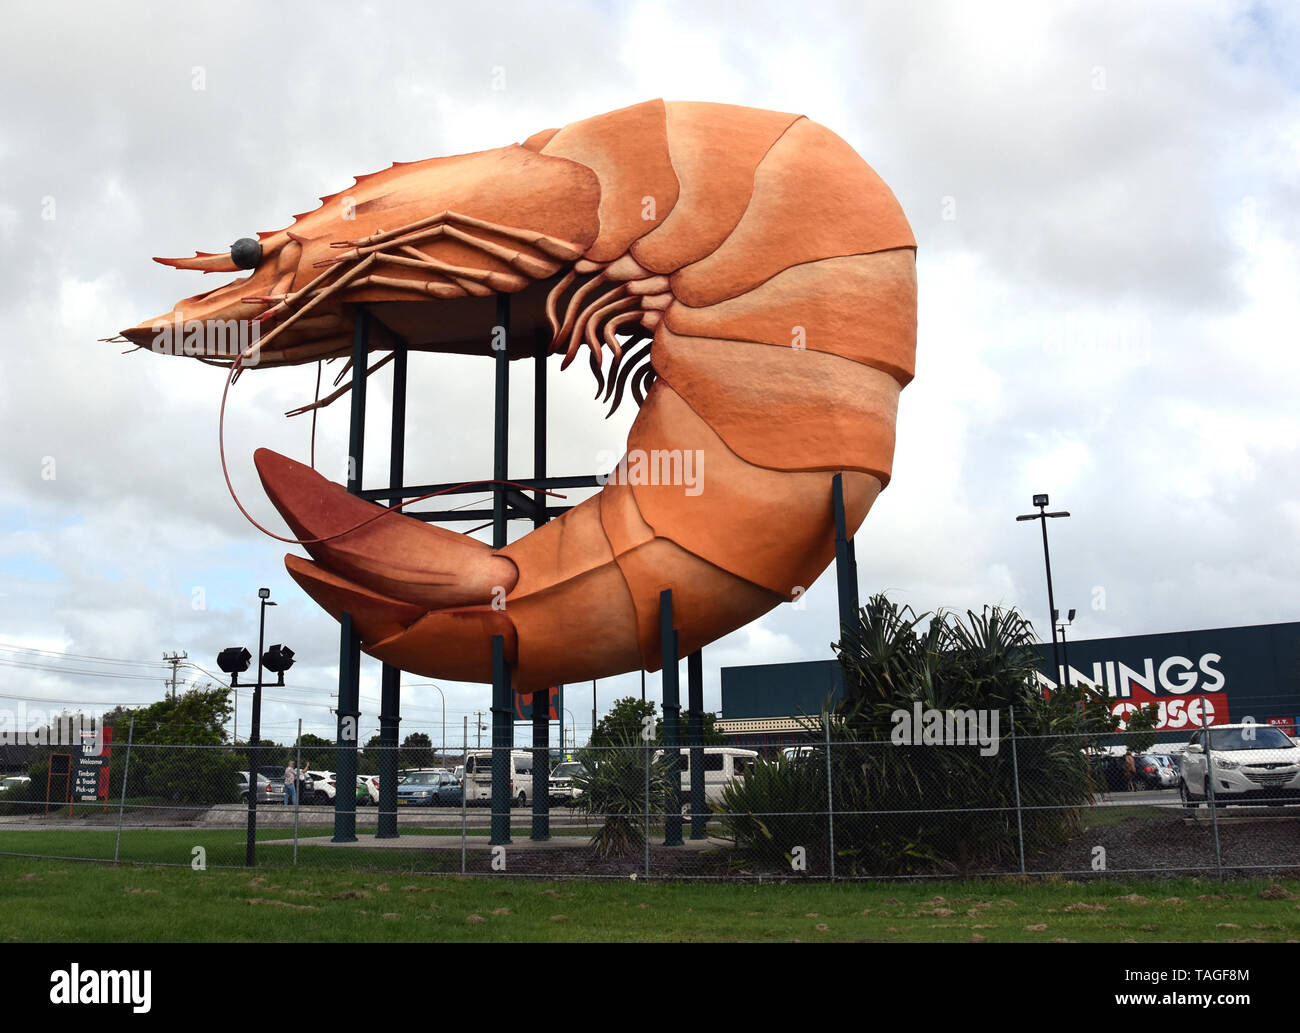 Ballina, Australia - Apr 20, 2019. The Big Prawn. The big things of Australia are a loosely related set of large structures, some of which are novelty Stock Photo